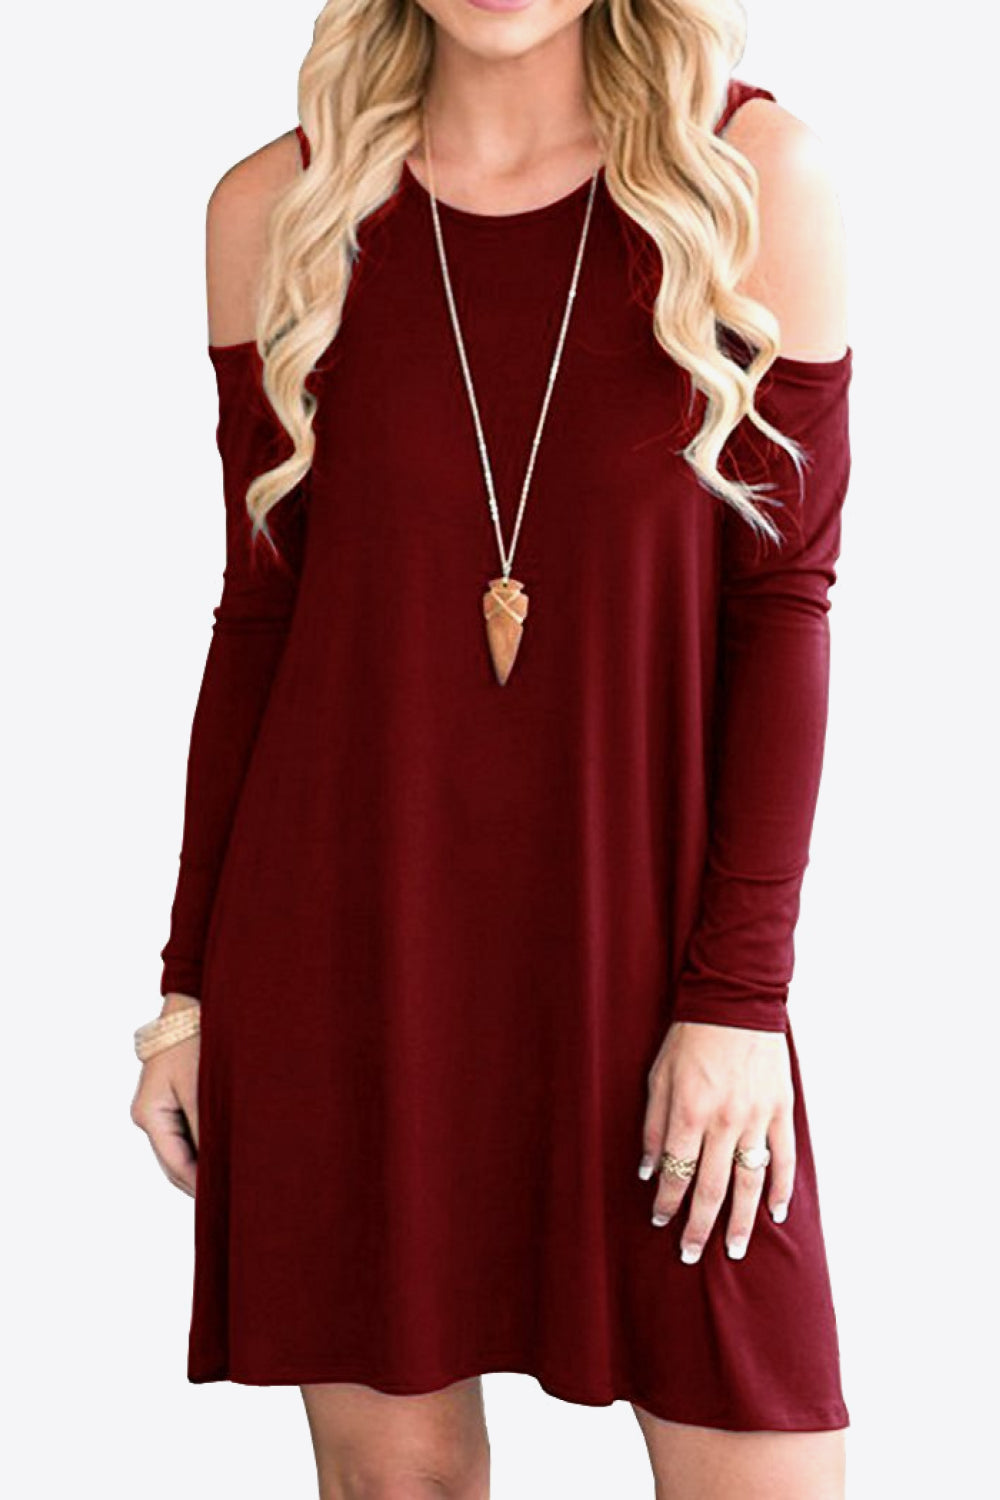 Women's Full Size Cold-Shoulder Long Sleeve Round Neck Dress